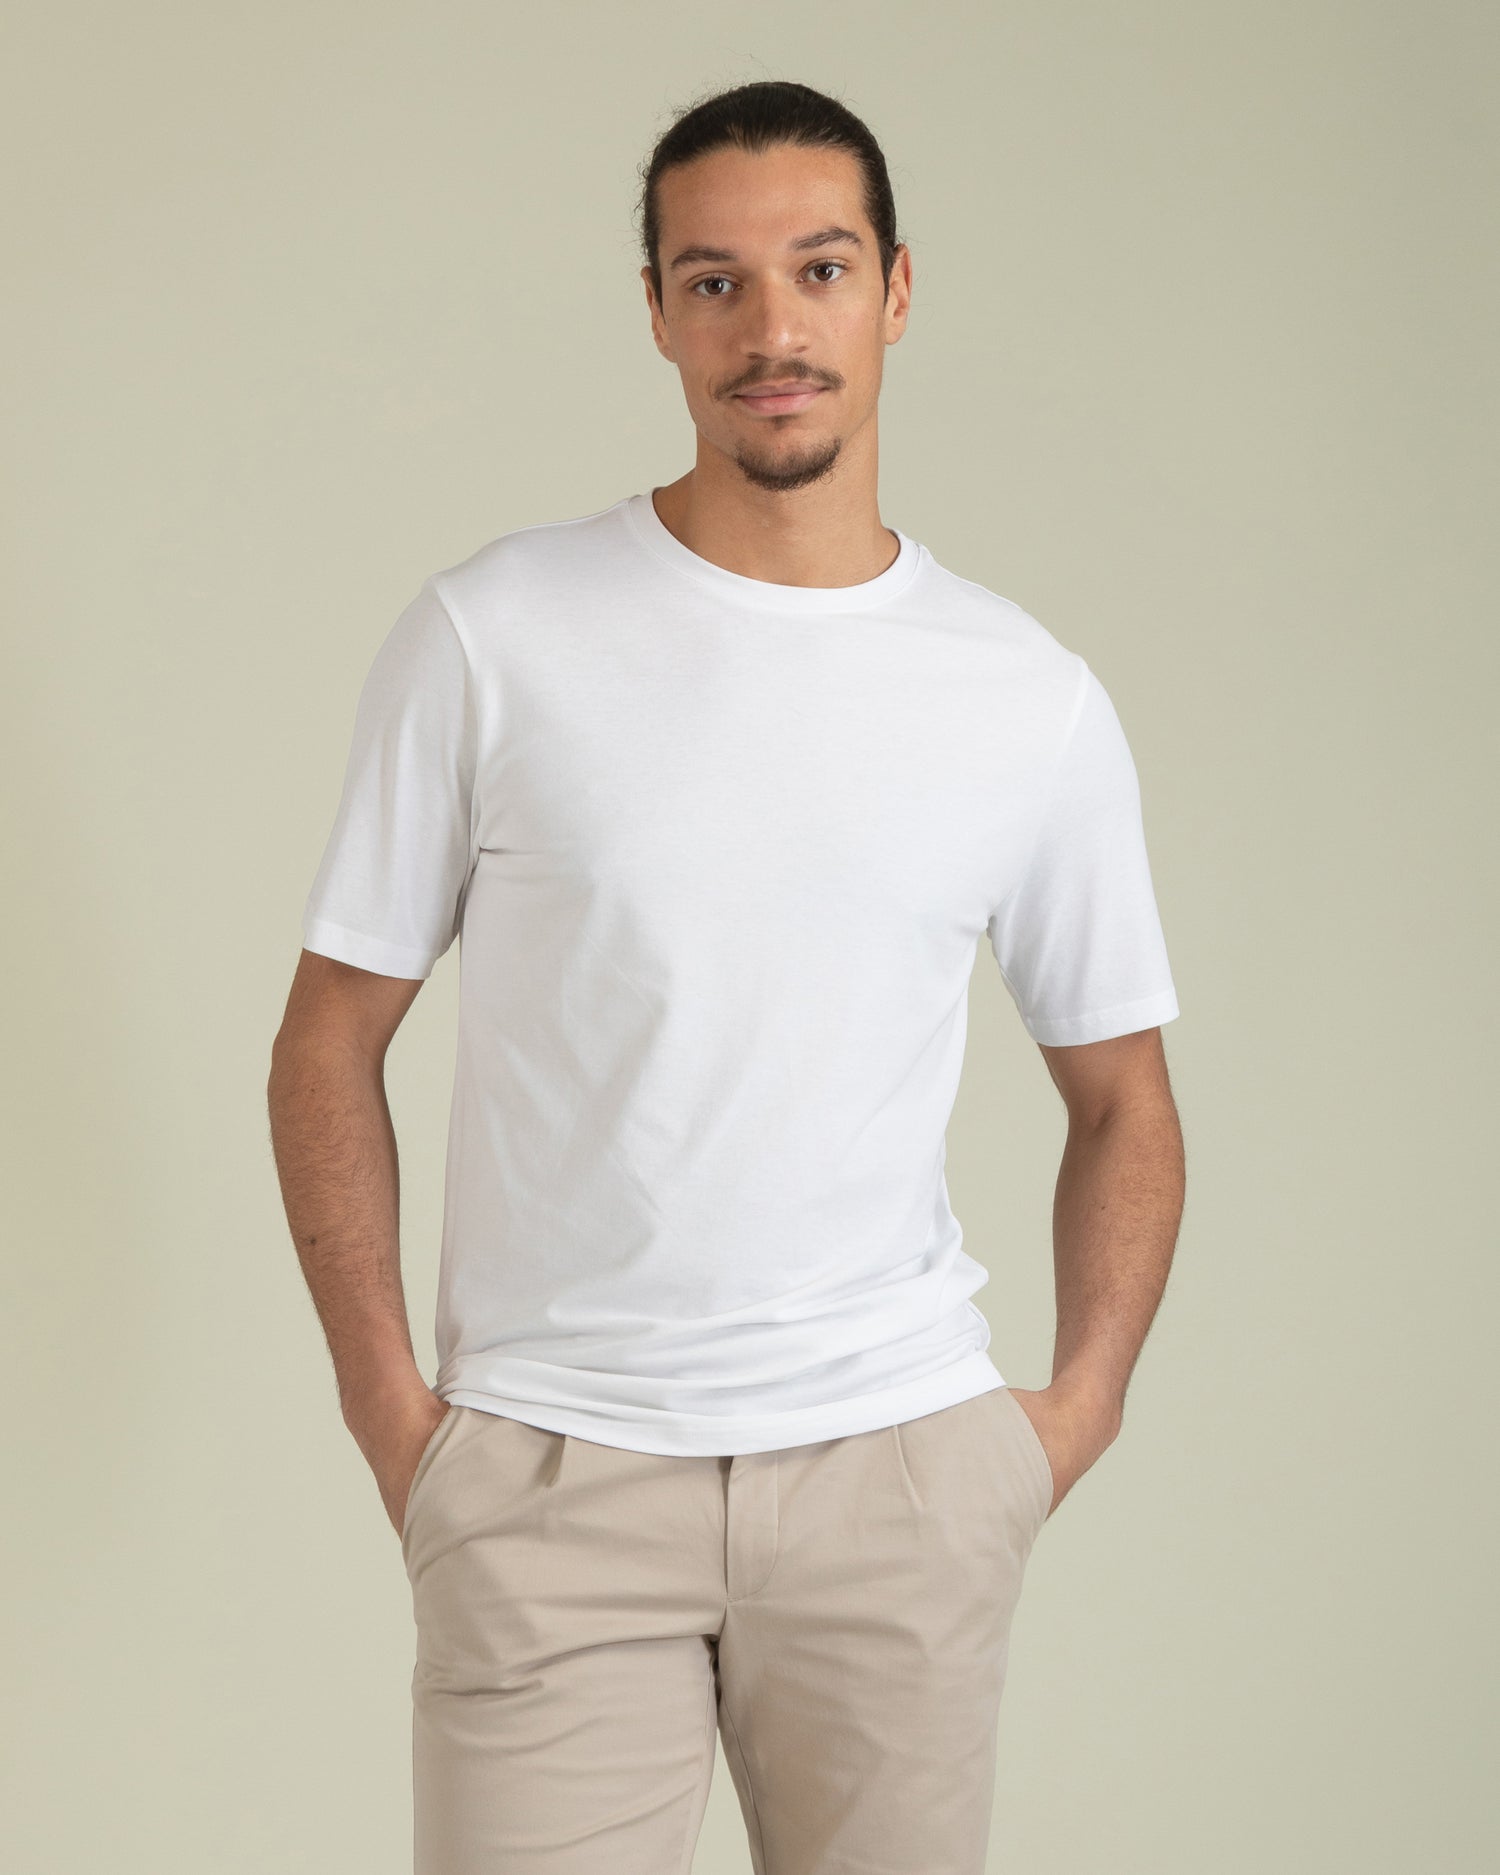 T-shirt in White (8624062857546)